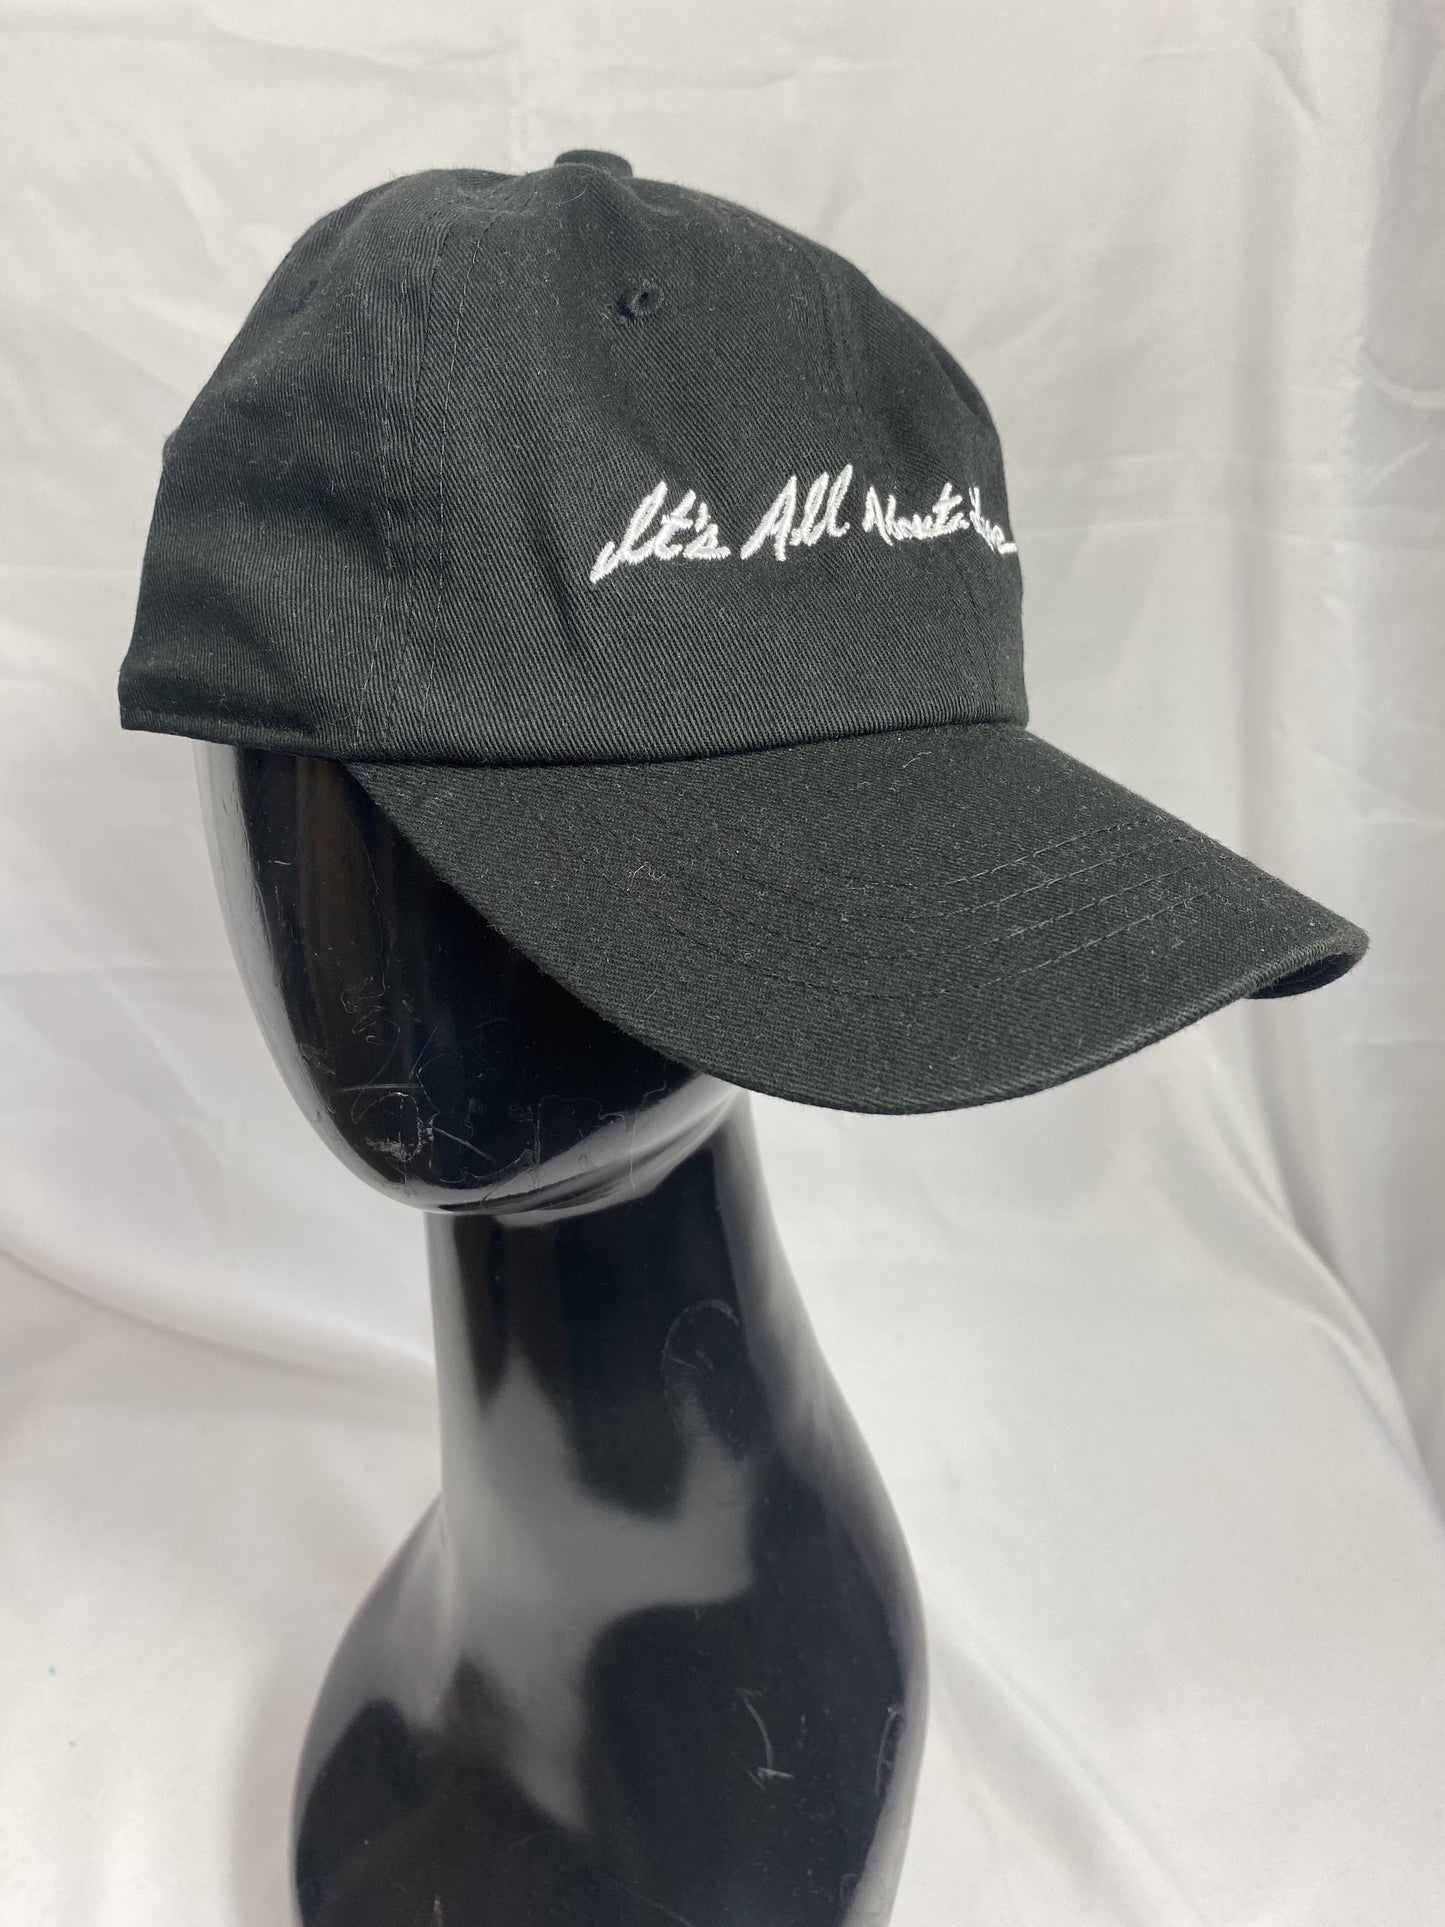 It's All About Love Black Baseball Cap